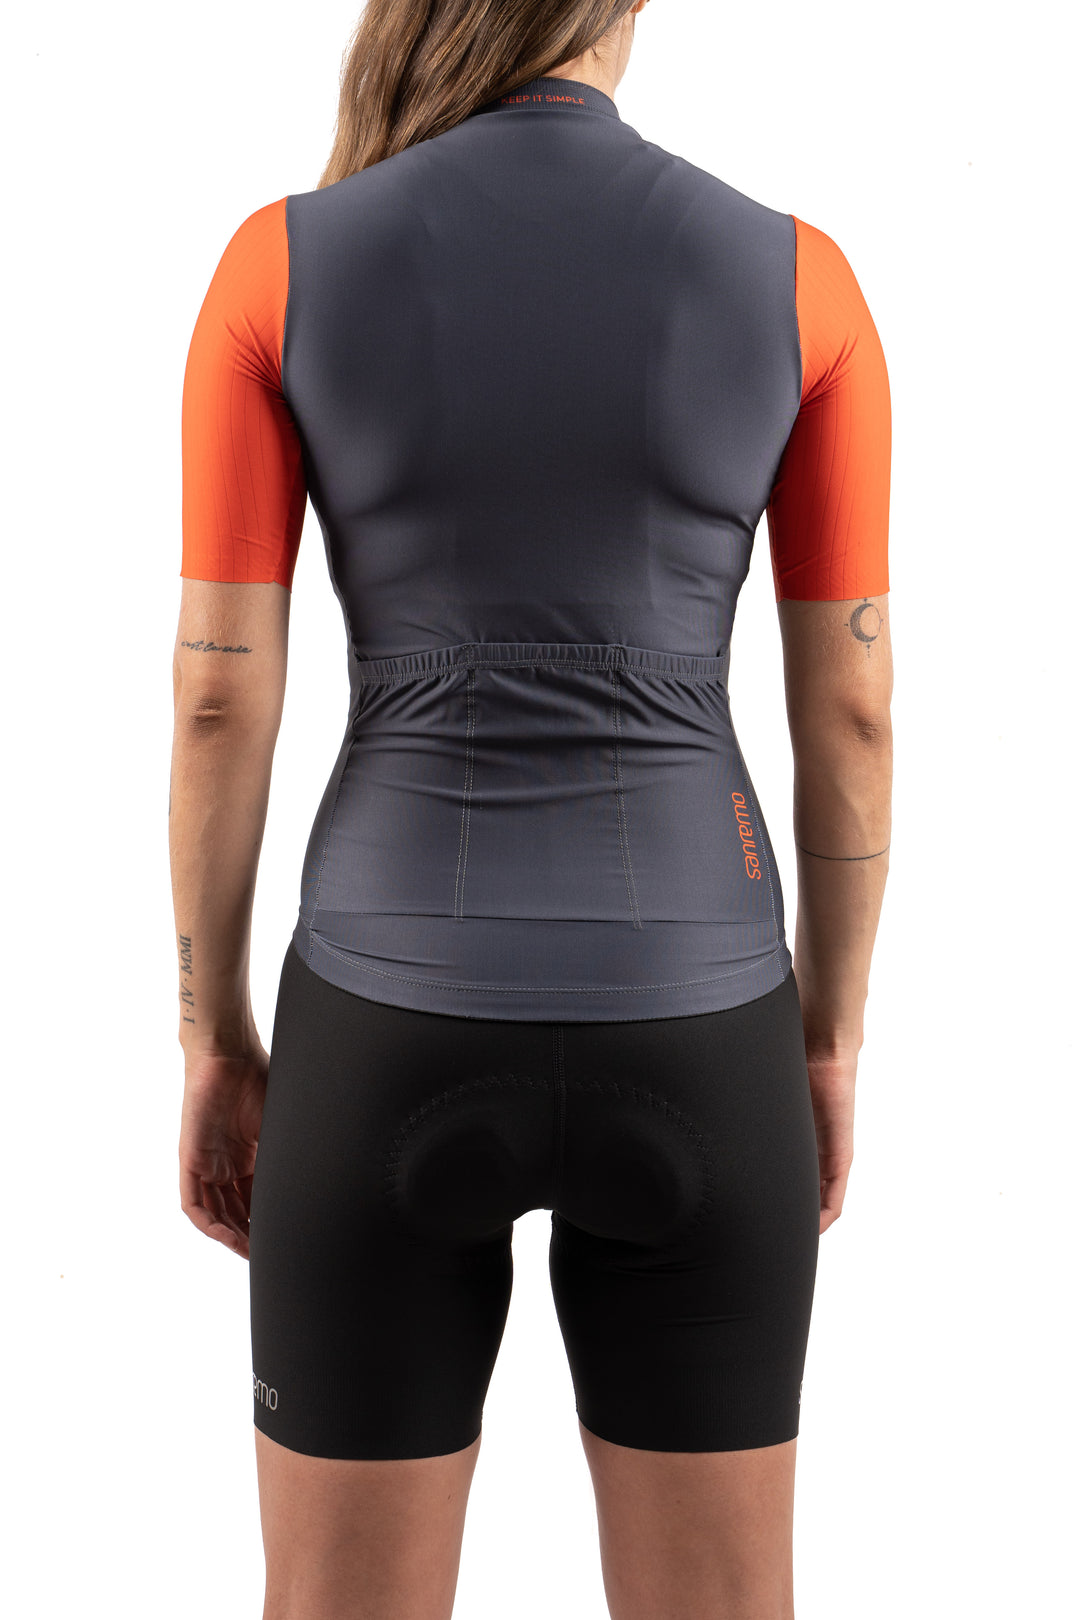 Jersey Corsa Grey Red  - Mujer